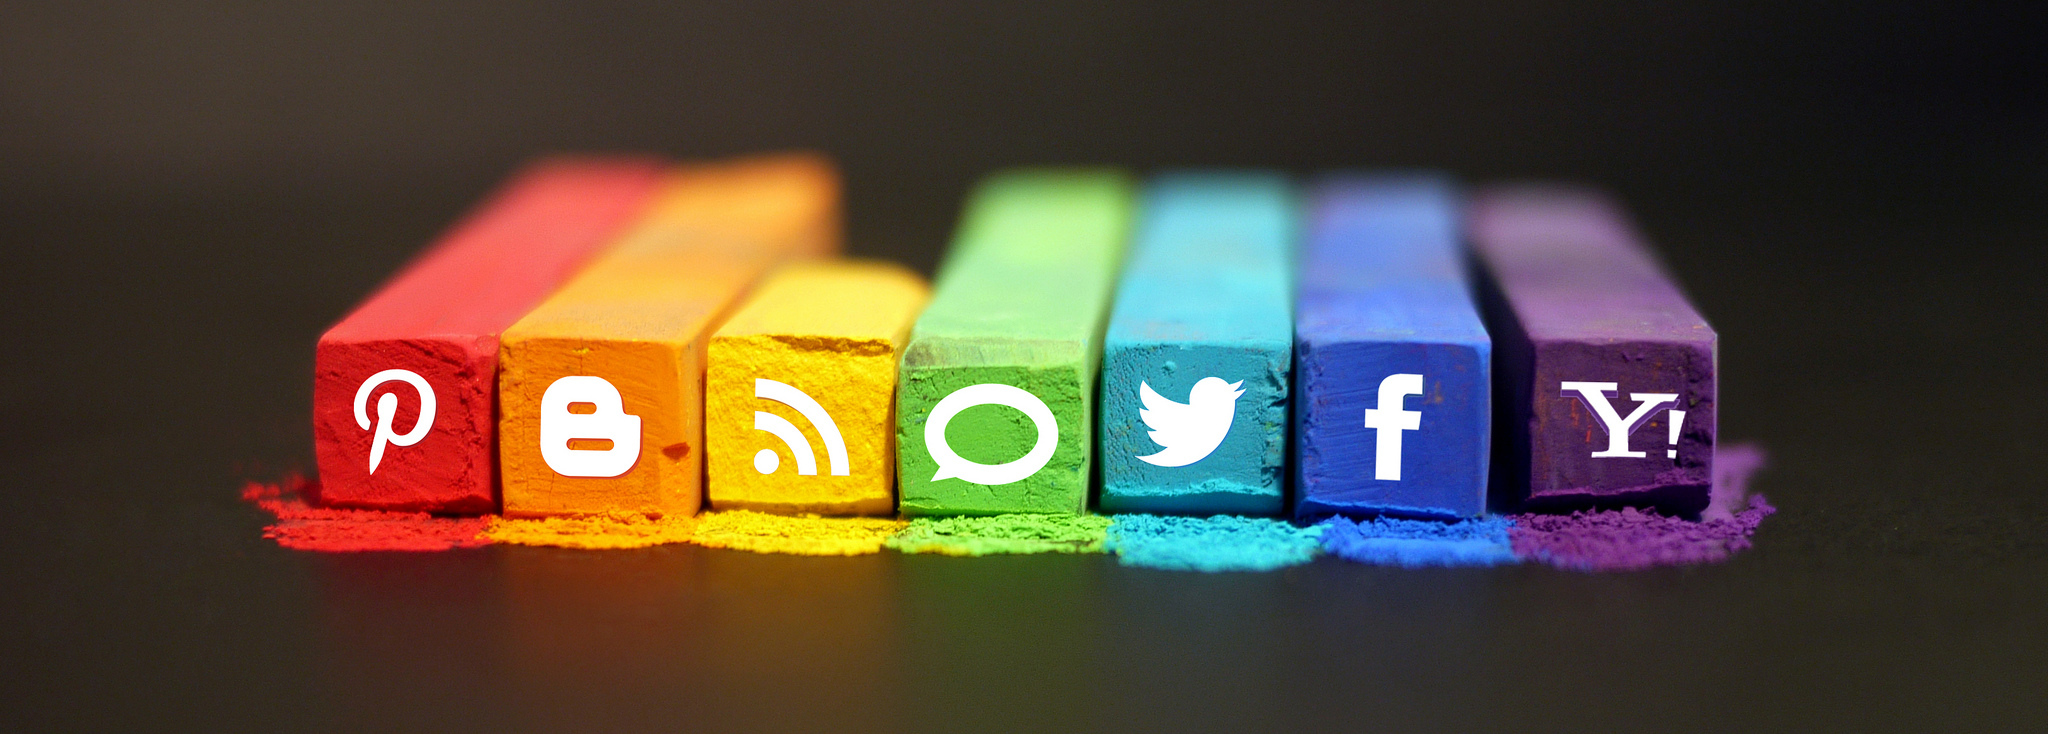 How Linking Your Website and Social Media Platforms Can Increase Your Reach